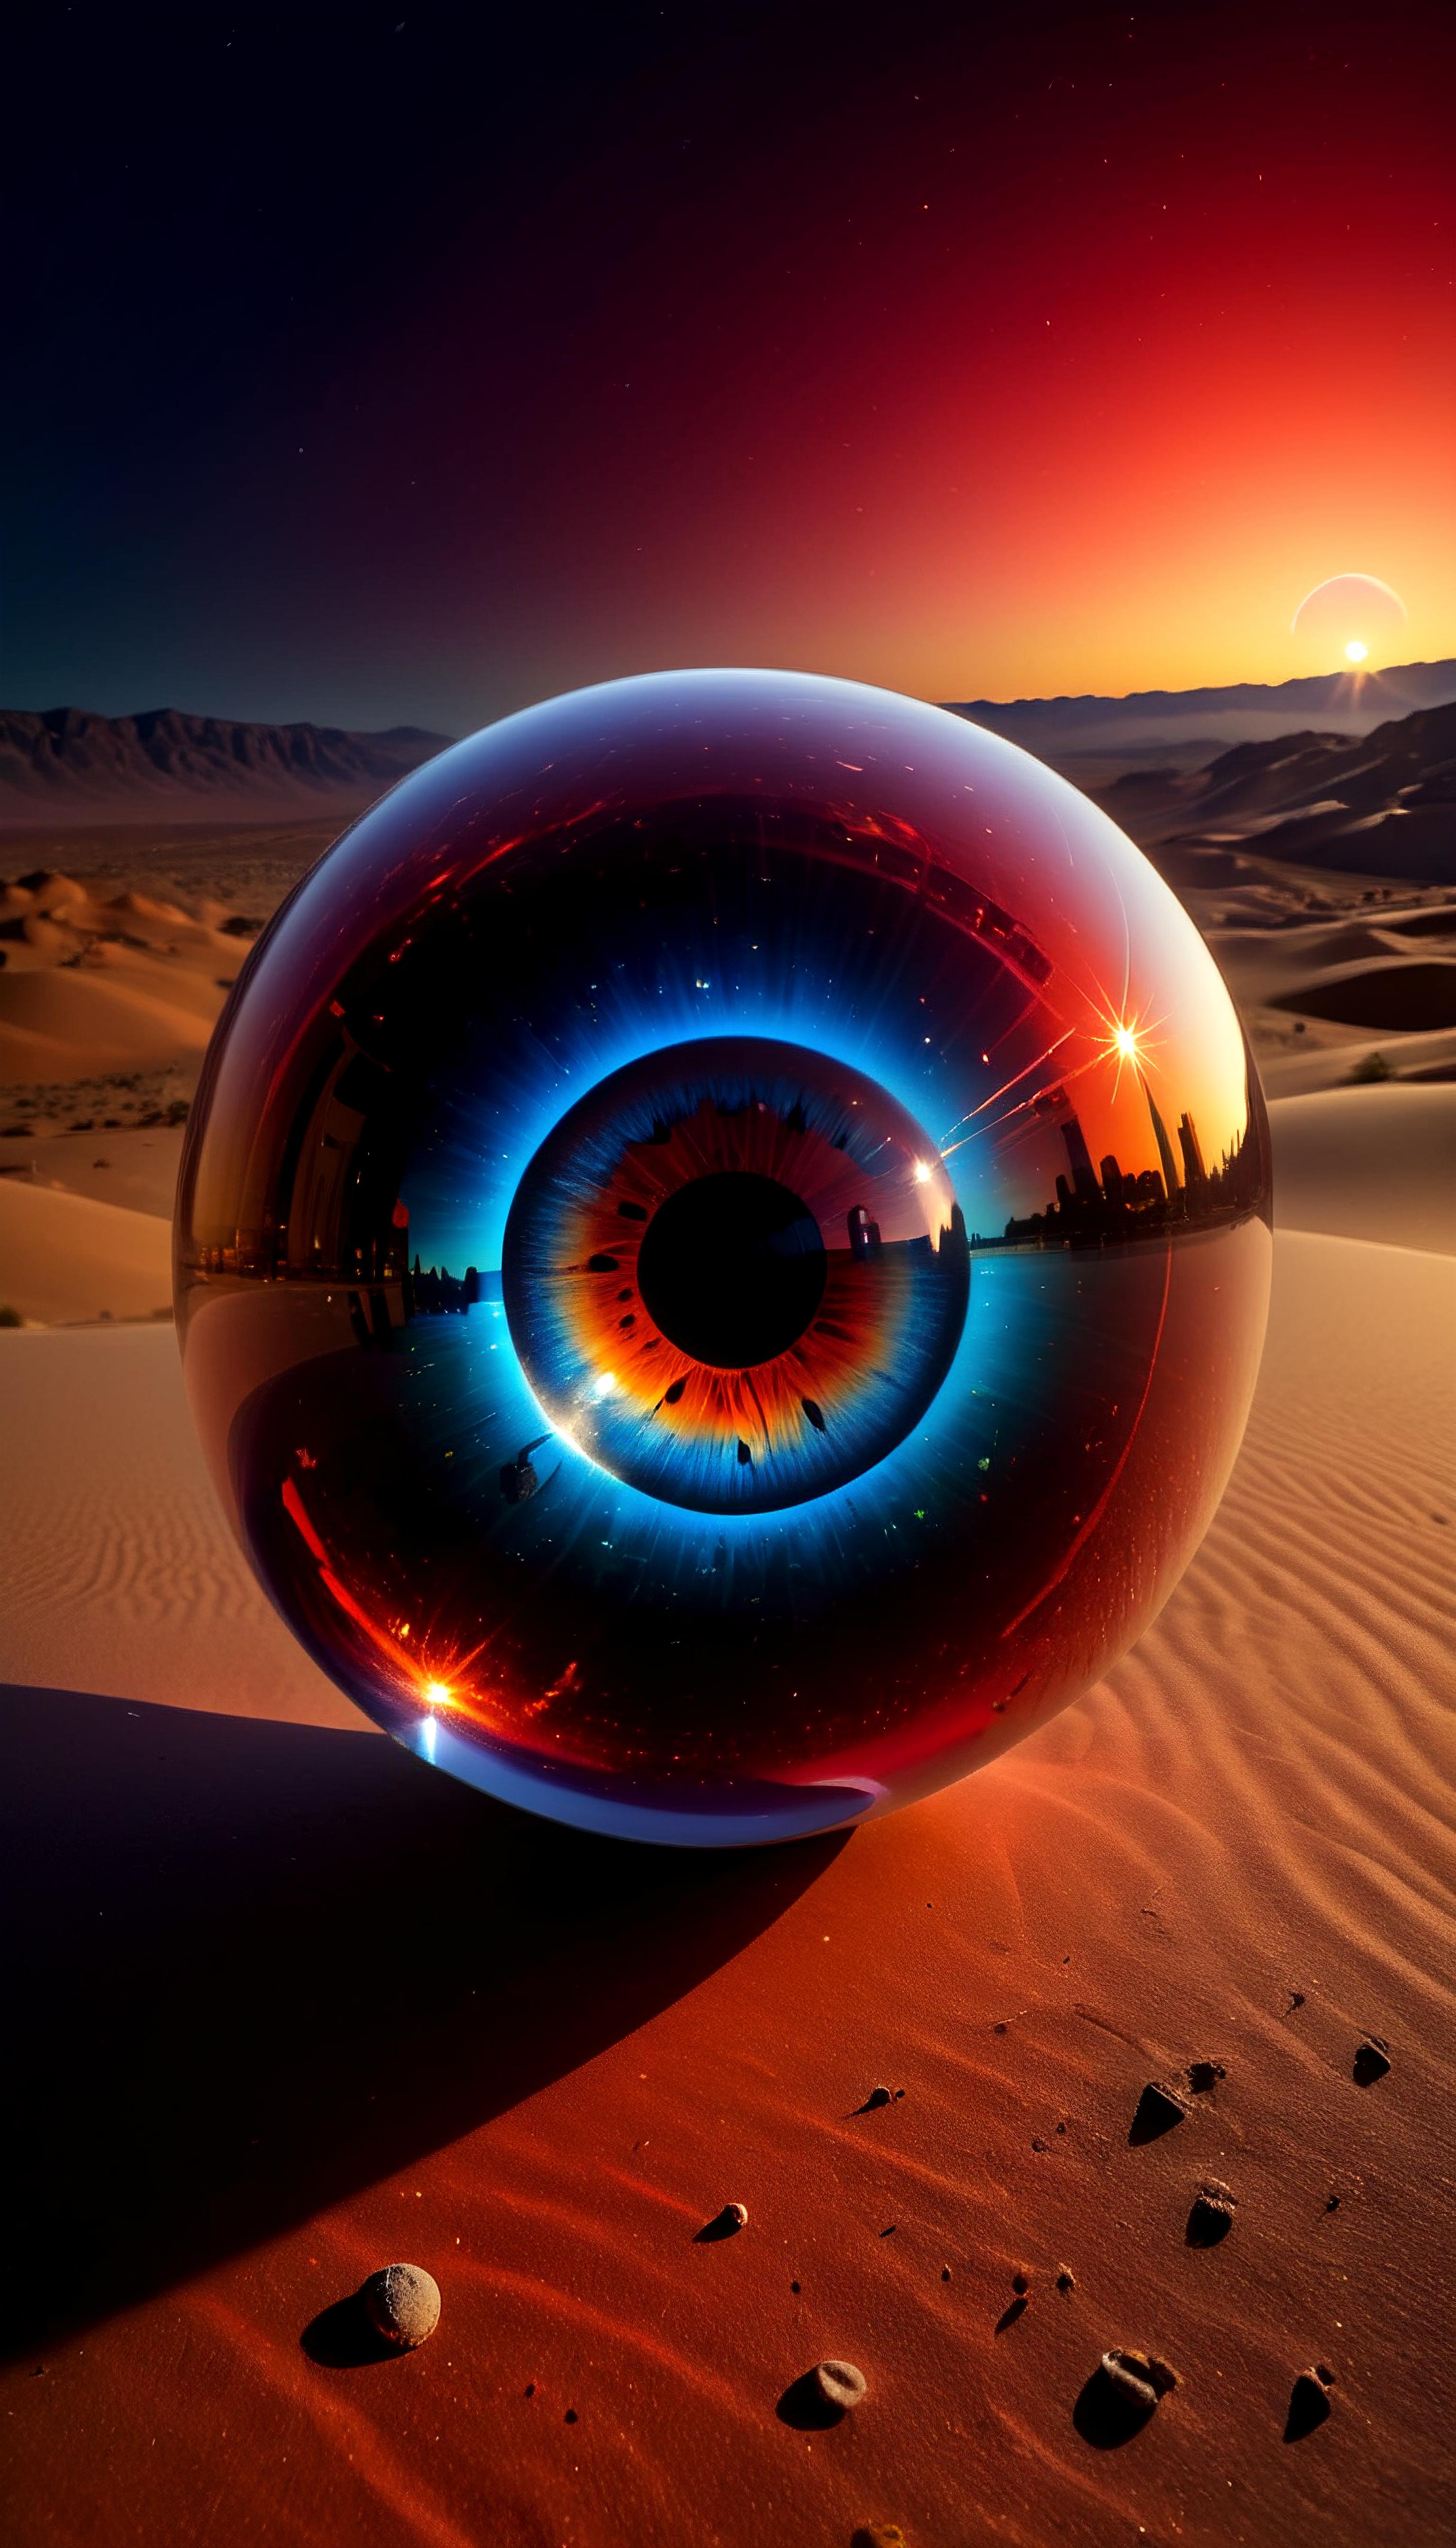 Artistic Glass Eye Sculpture with Reflection of City Skyline in Sand Dunes.